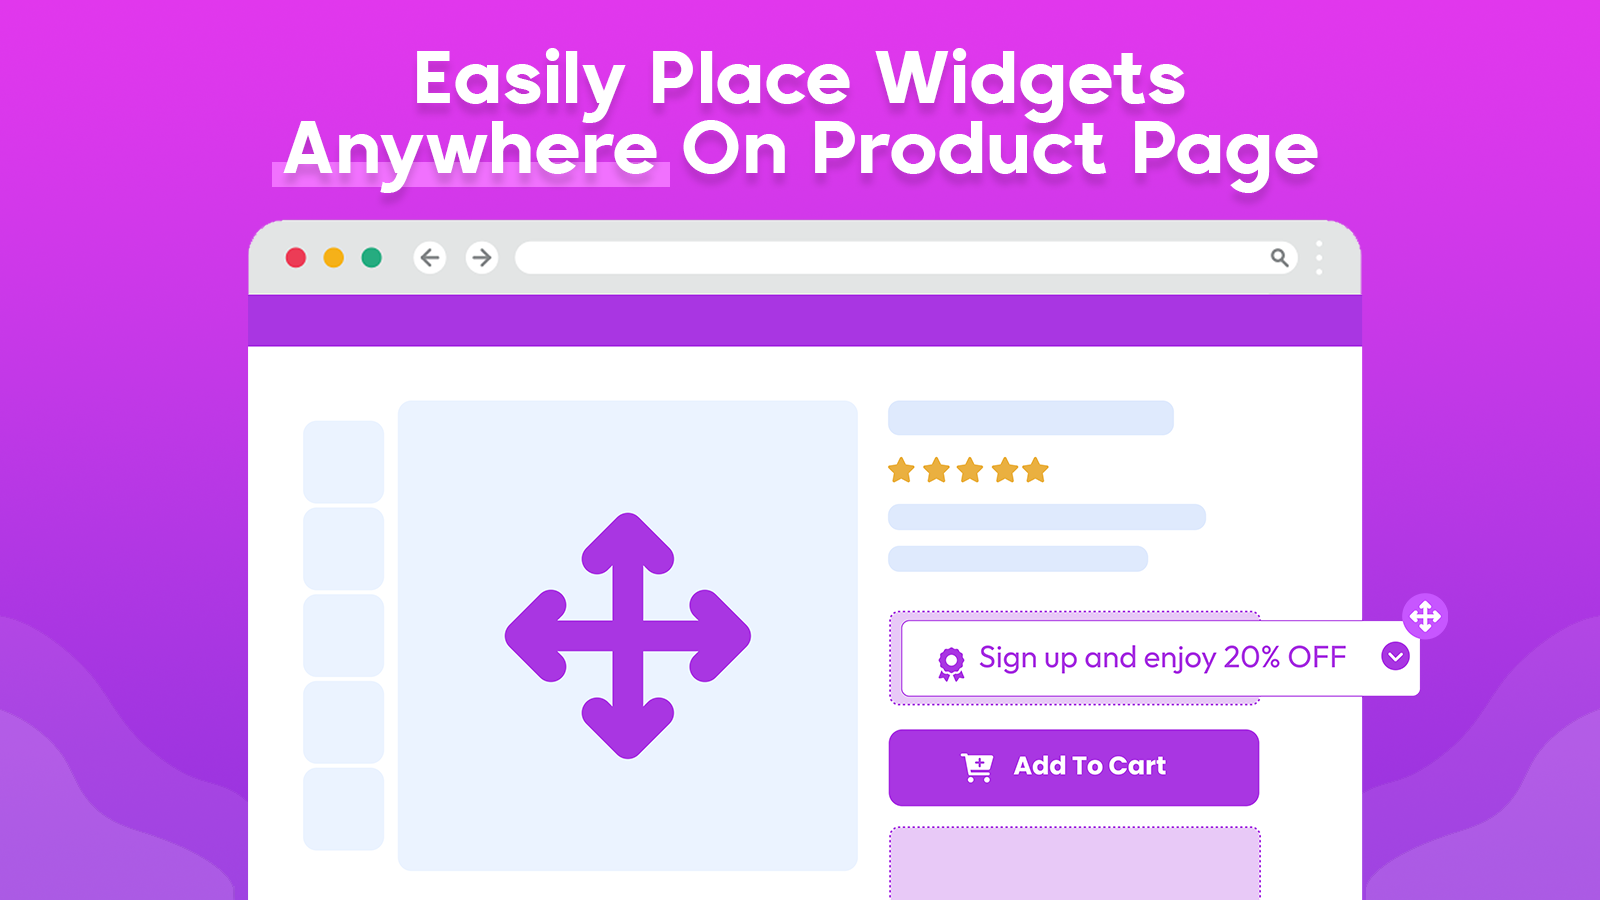 Easily place widget anywhere on product page